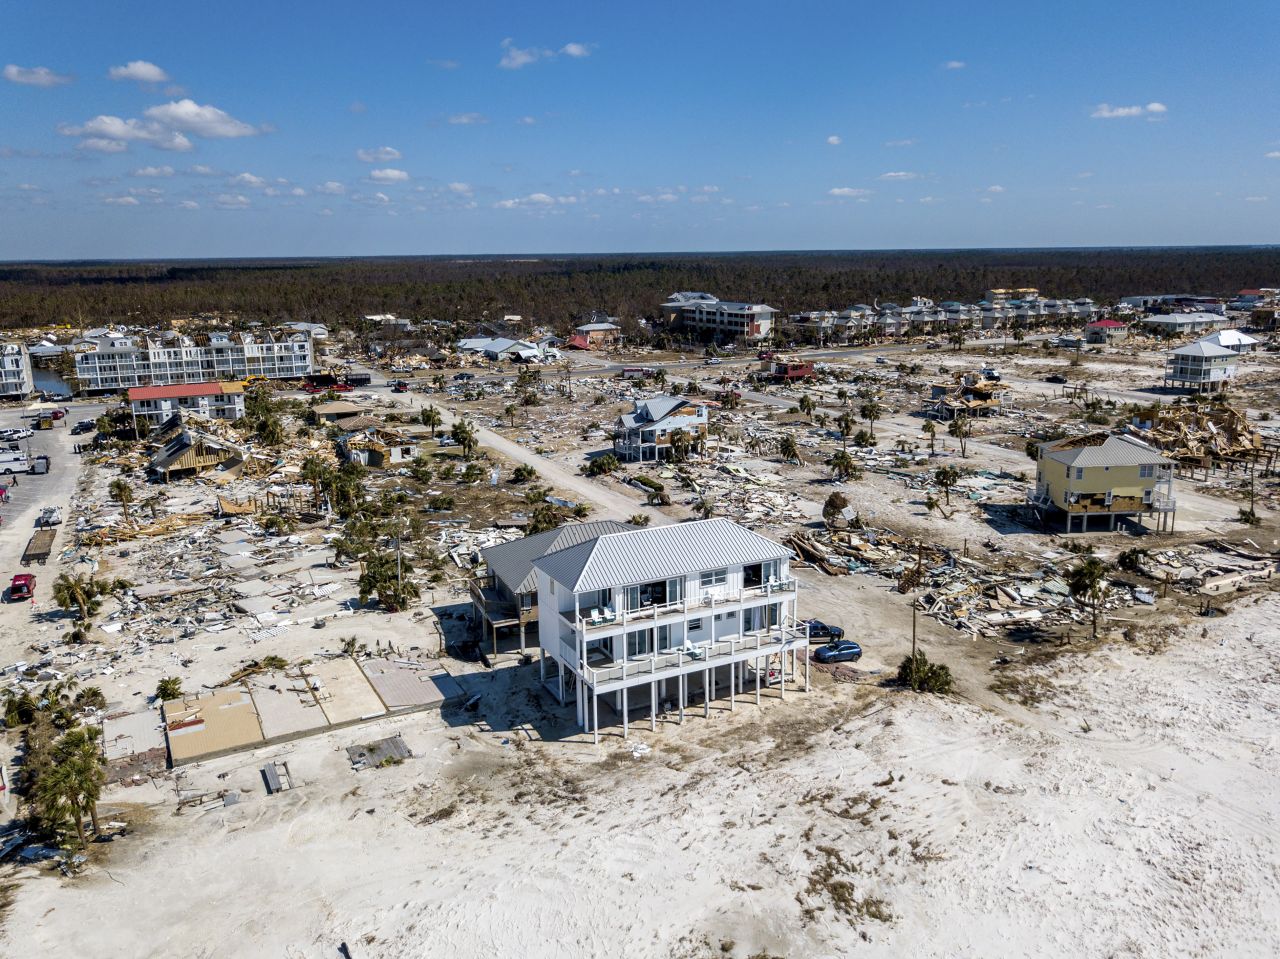 When Hurricane Michael hit Florida in 2018, it was described as "<a href="https://www.cnn.com/2018/10/10/us/hurricane-michael-dangers" target="_blank">a monster unlike any other</a>." The home of Russell King and his nephew Lebron Lackey in Mexico Beach, Florida (pictured) was built to withstand 250-mph winds, and miraculously remained standing among the wreckage of the neighborhood.